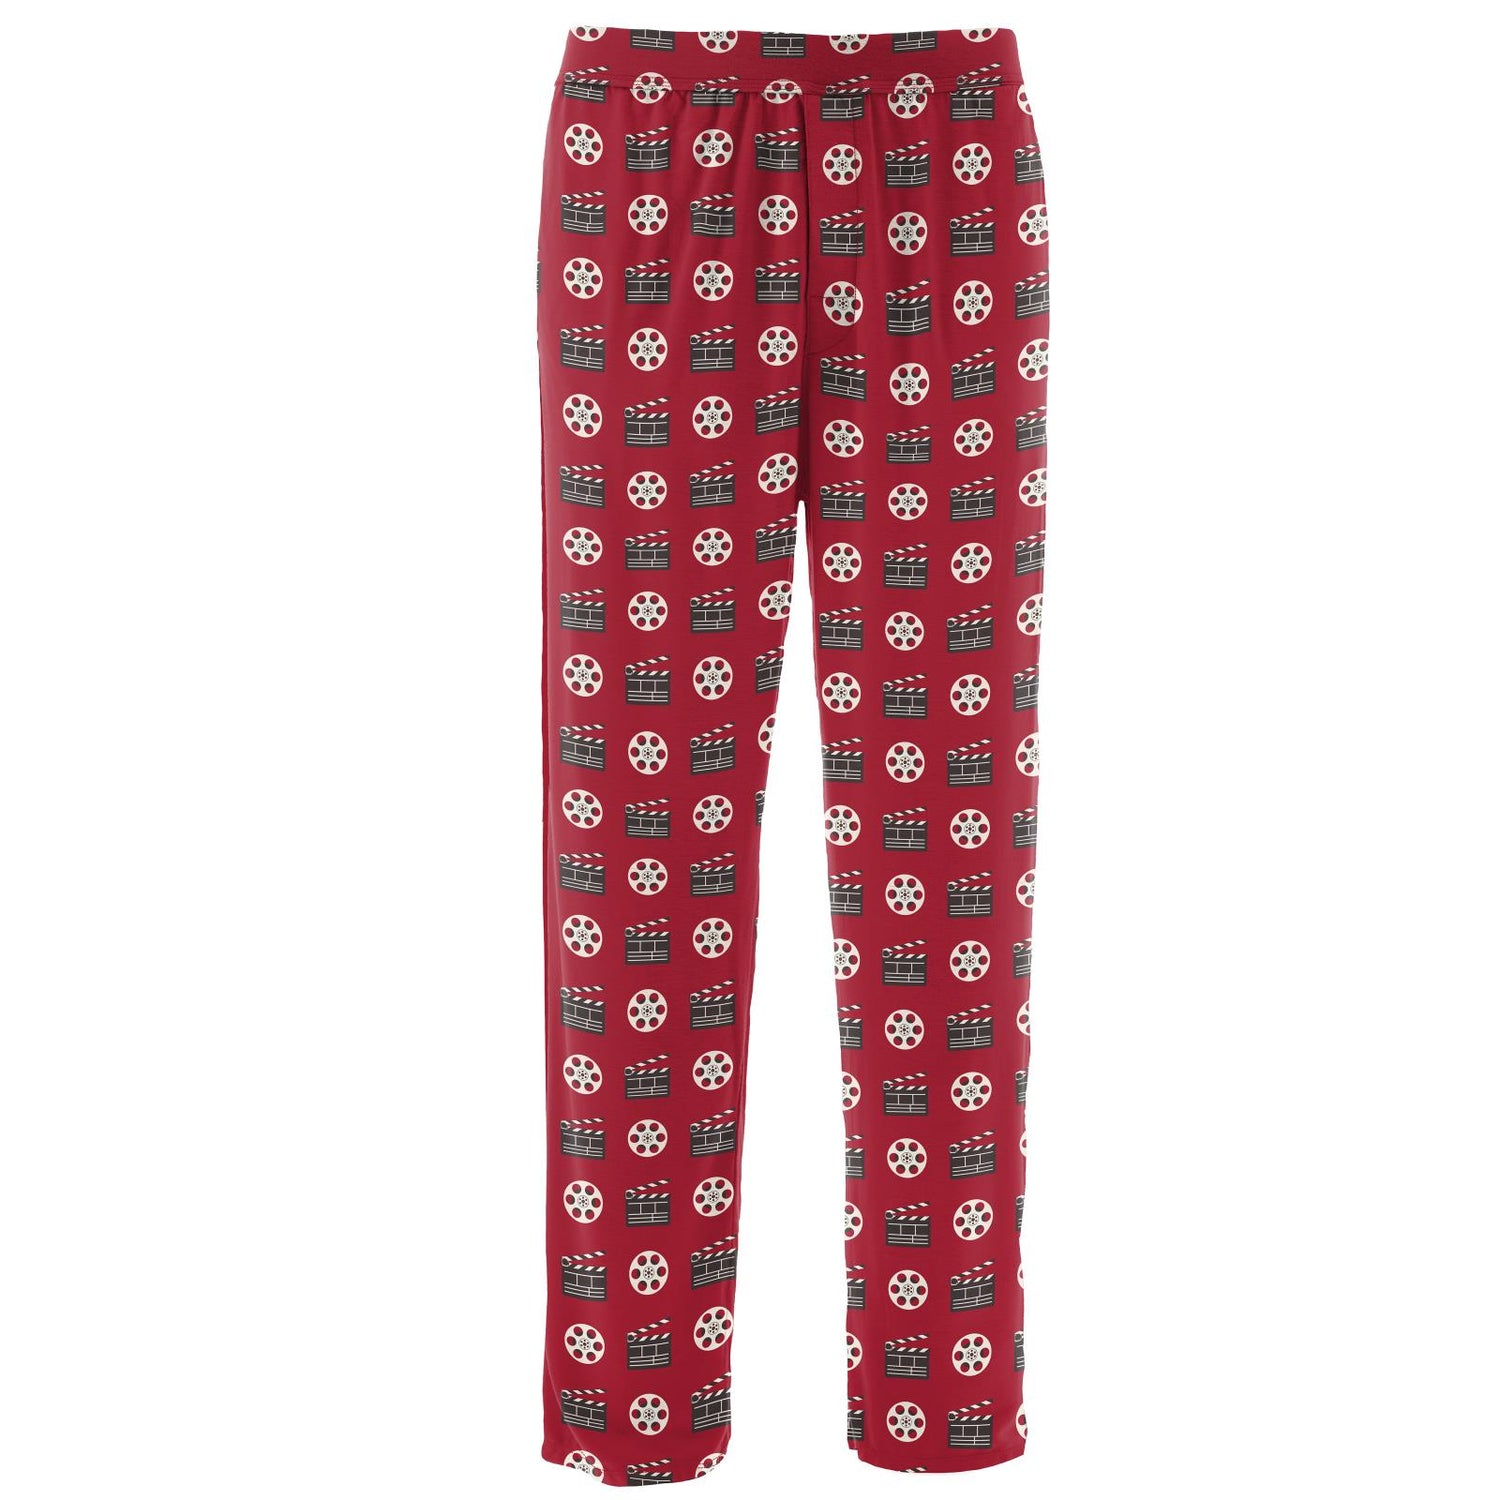 Men's Print Pajama Pants in Candy Apple Clapper Board and Film